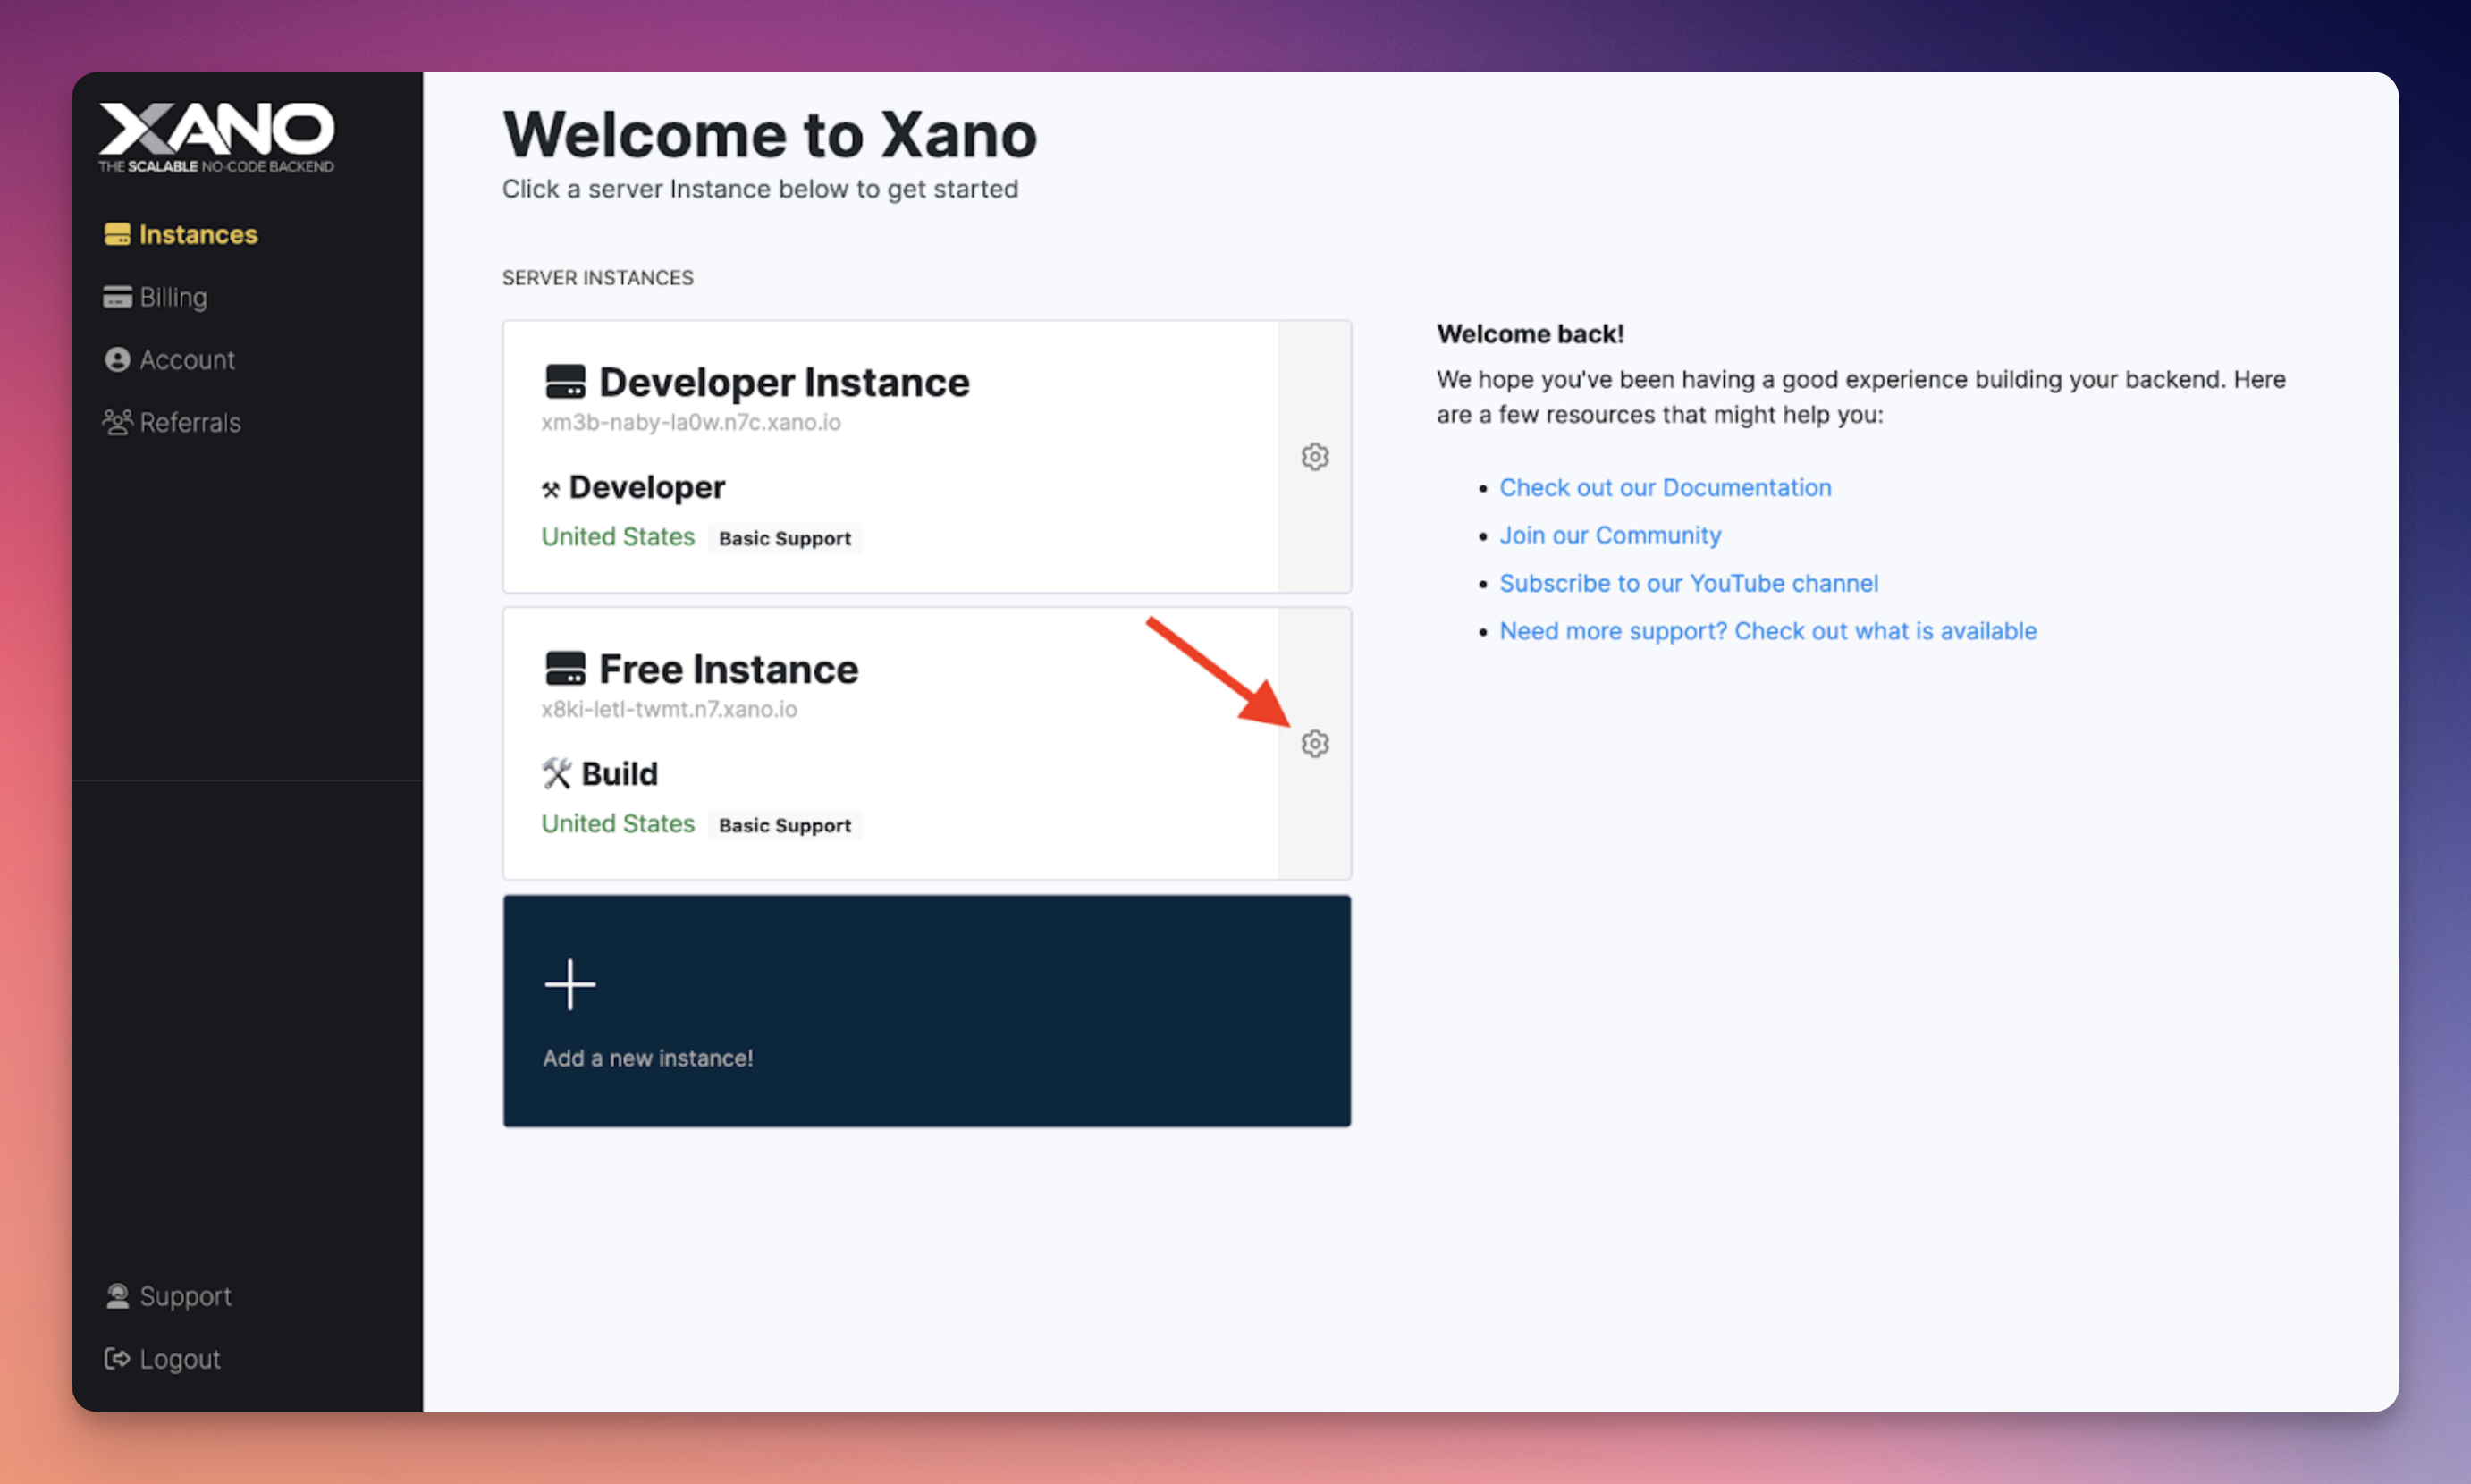 Xano reconnect step 1.1